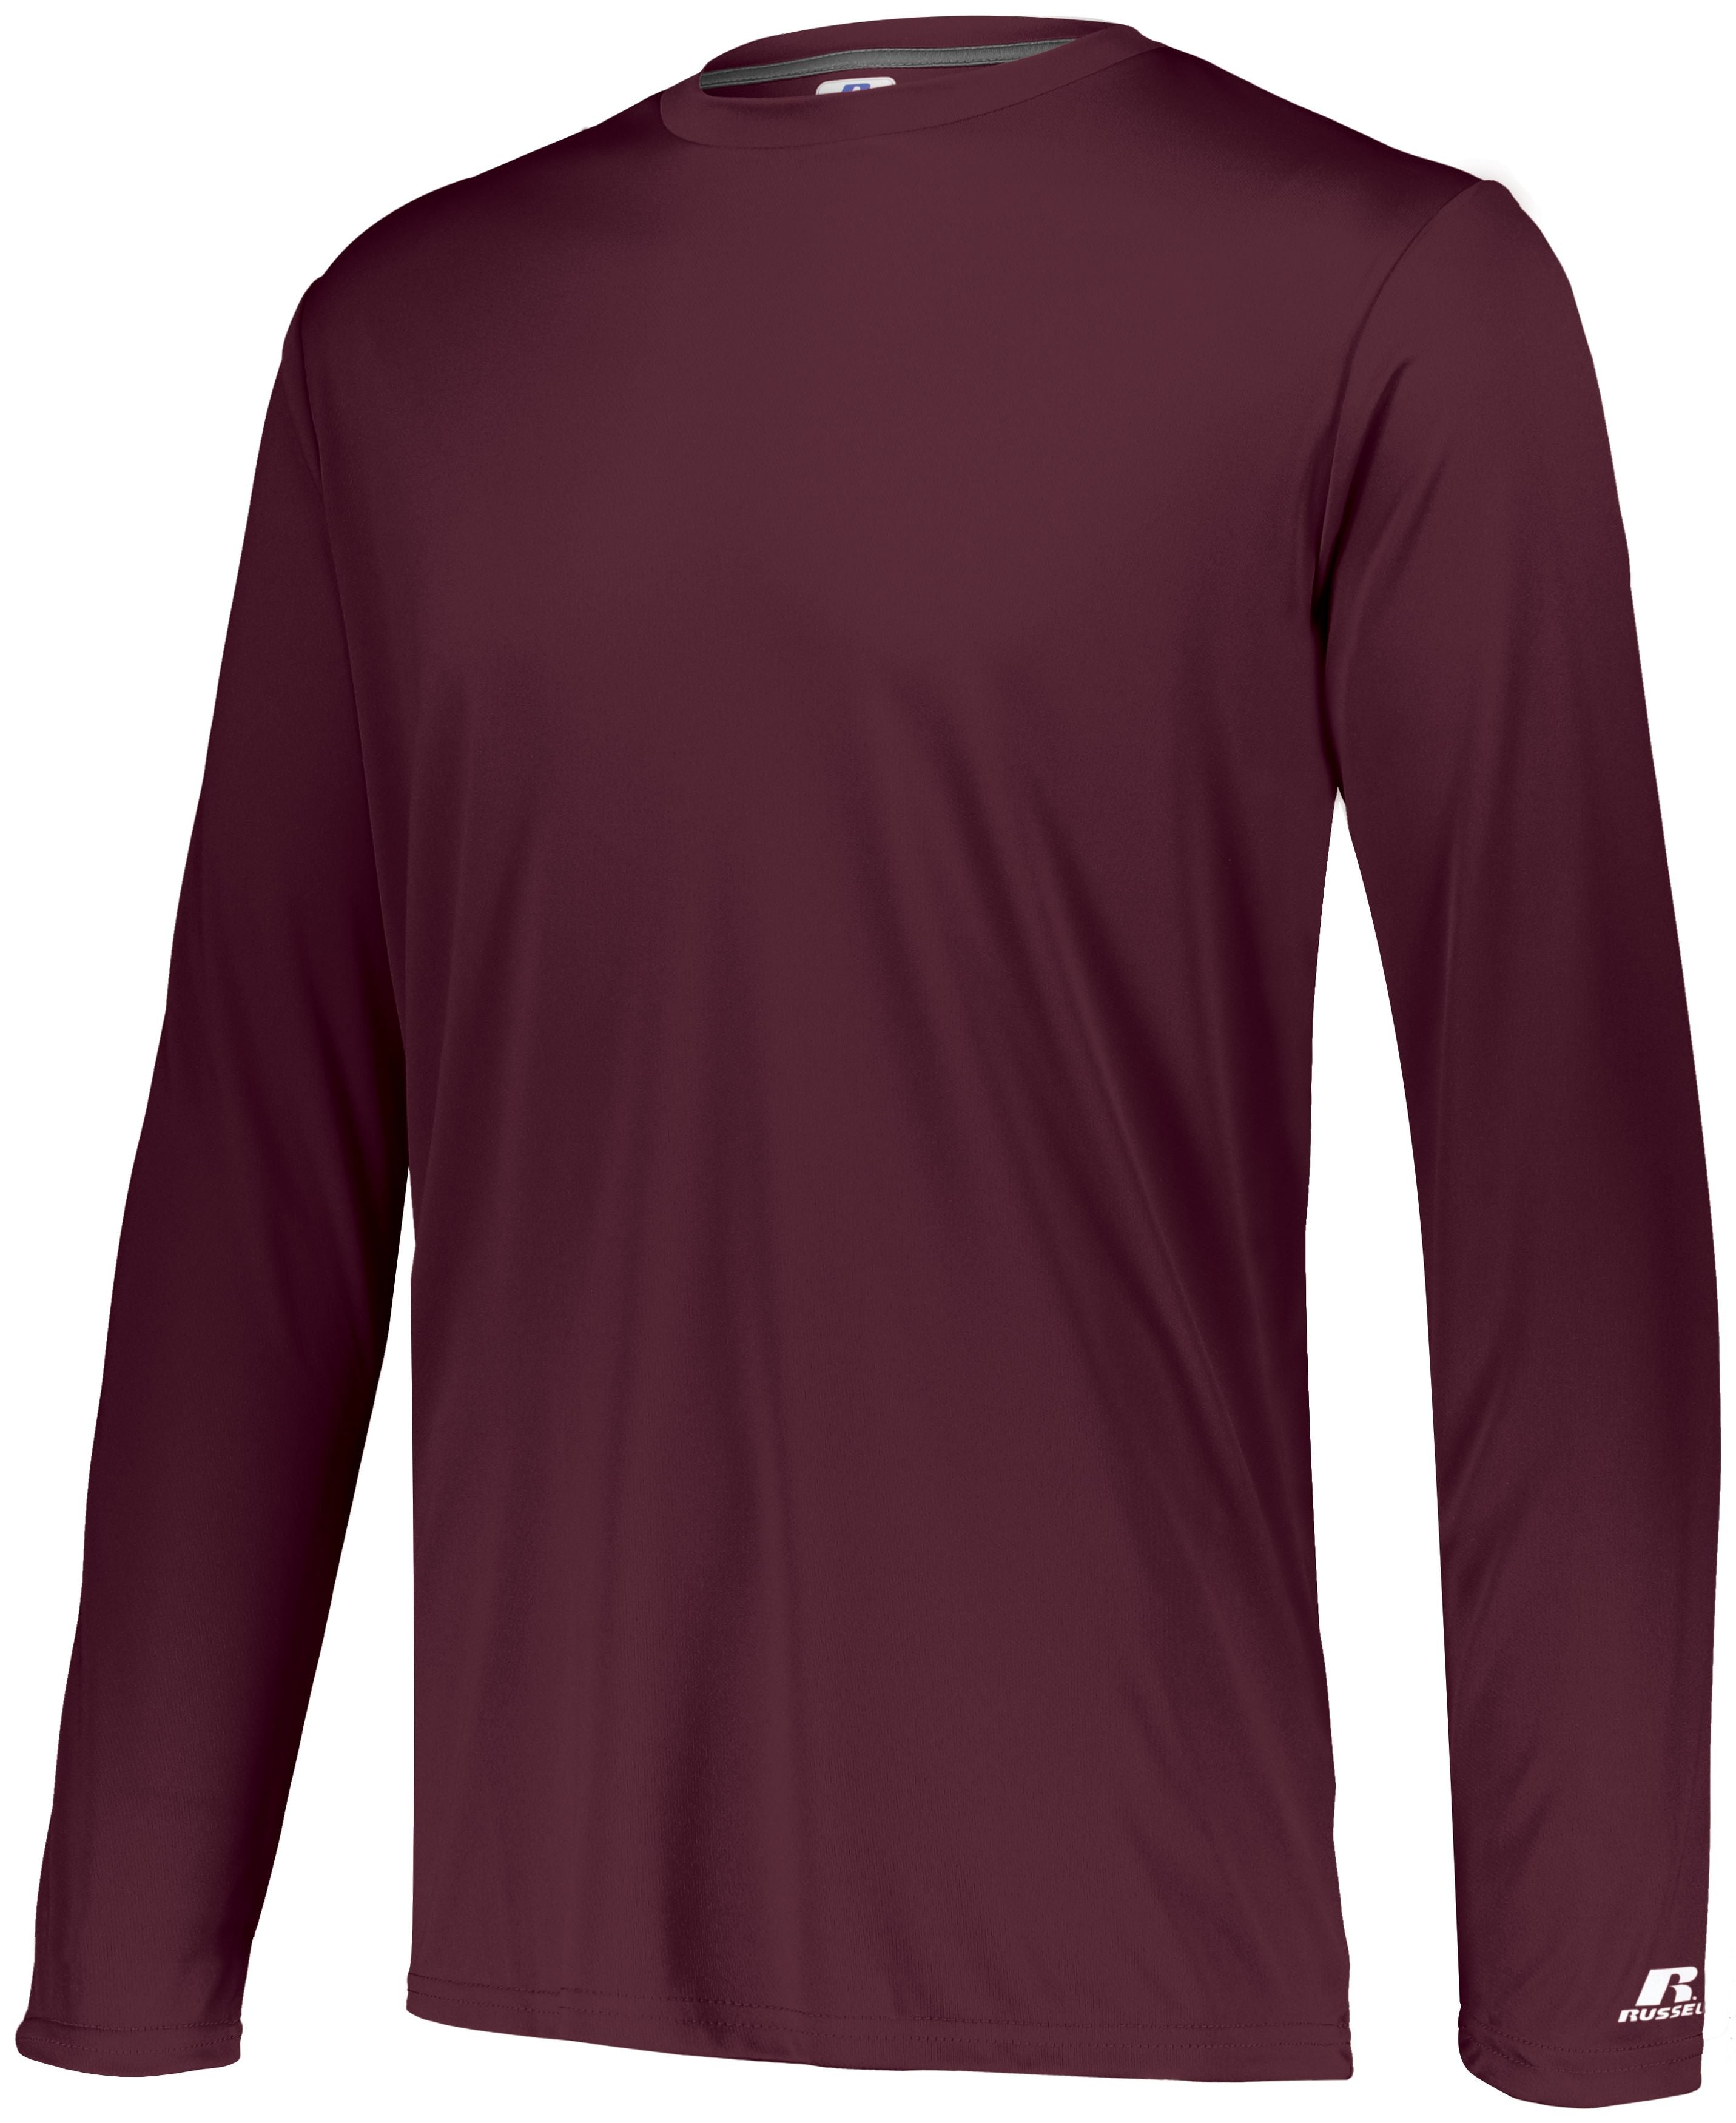 Russell Athletic Dri-Power Core Performance Long Sleeve Tee in Maroon  -Part of the Adult, Adult-Tee-Shirt, T-Shirts, Russell-Athletic-Products, Shirts product lines at KanaleyCreations.com